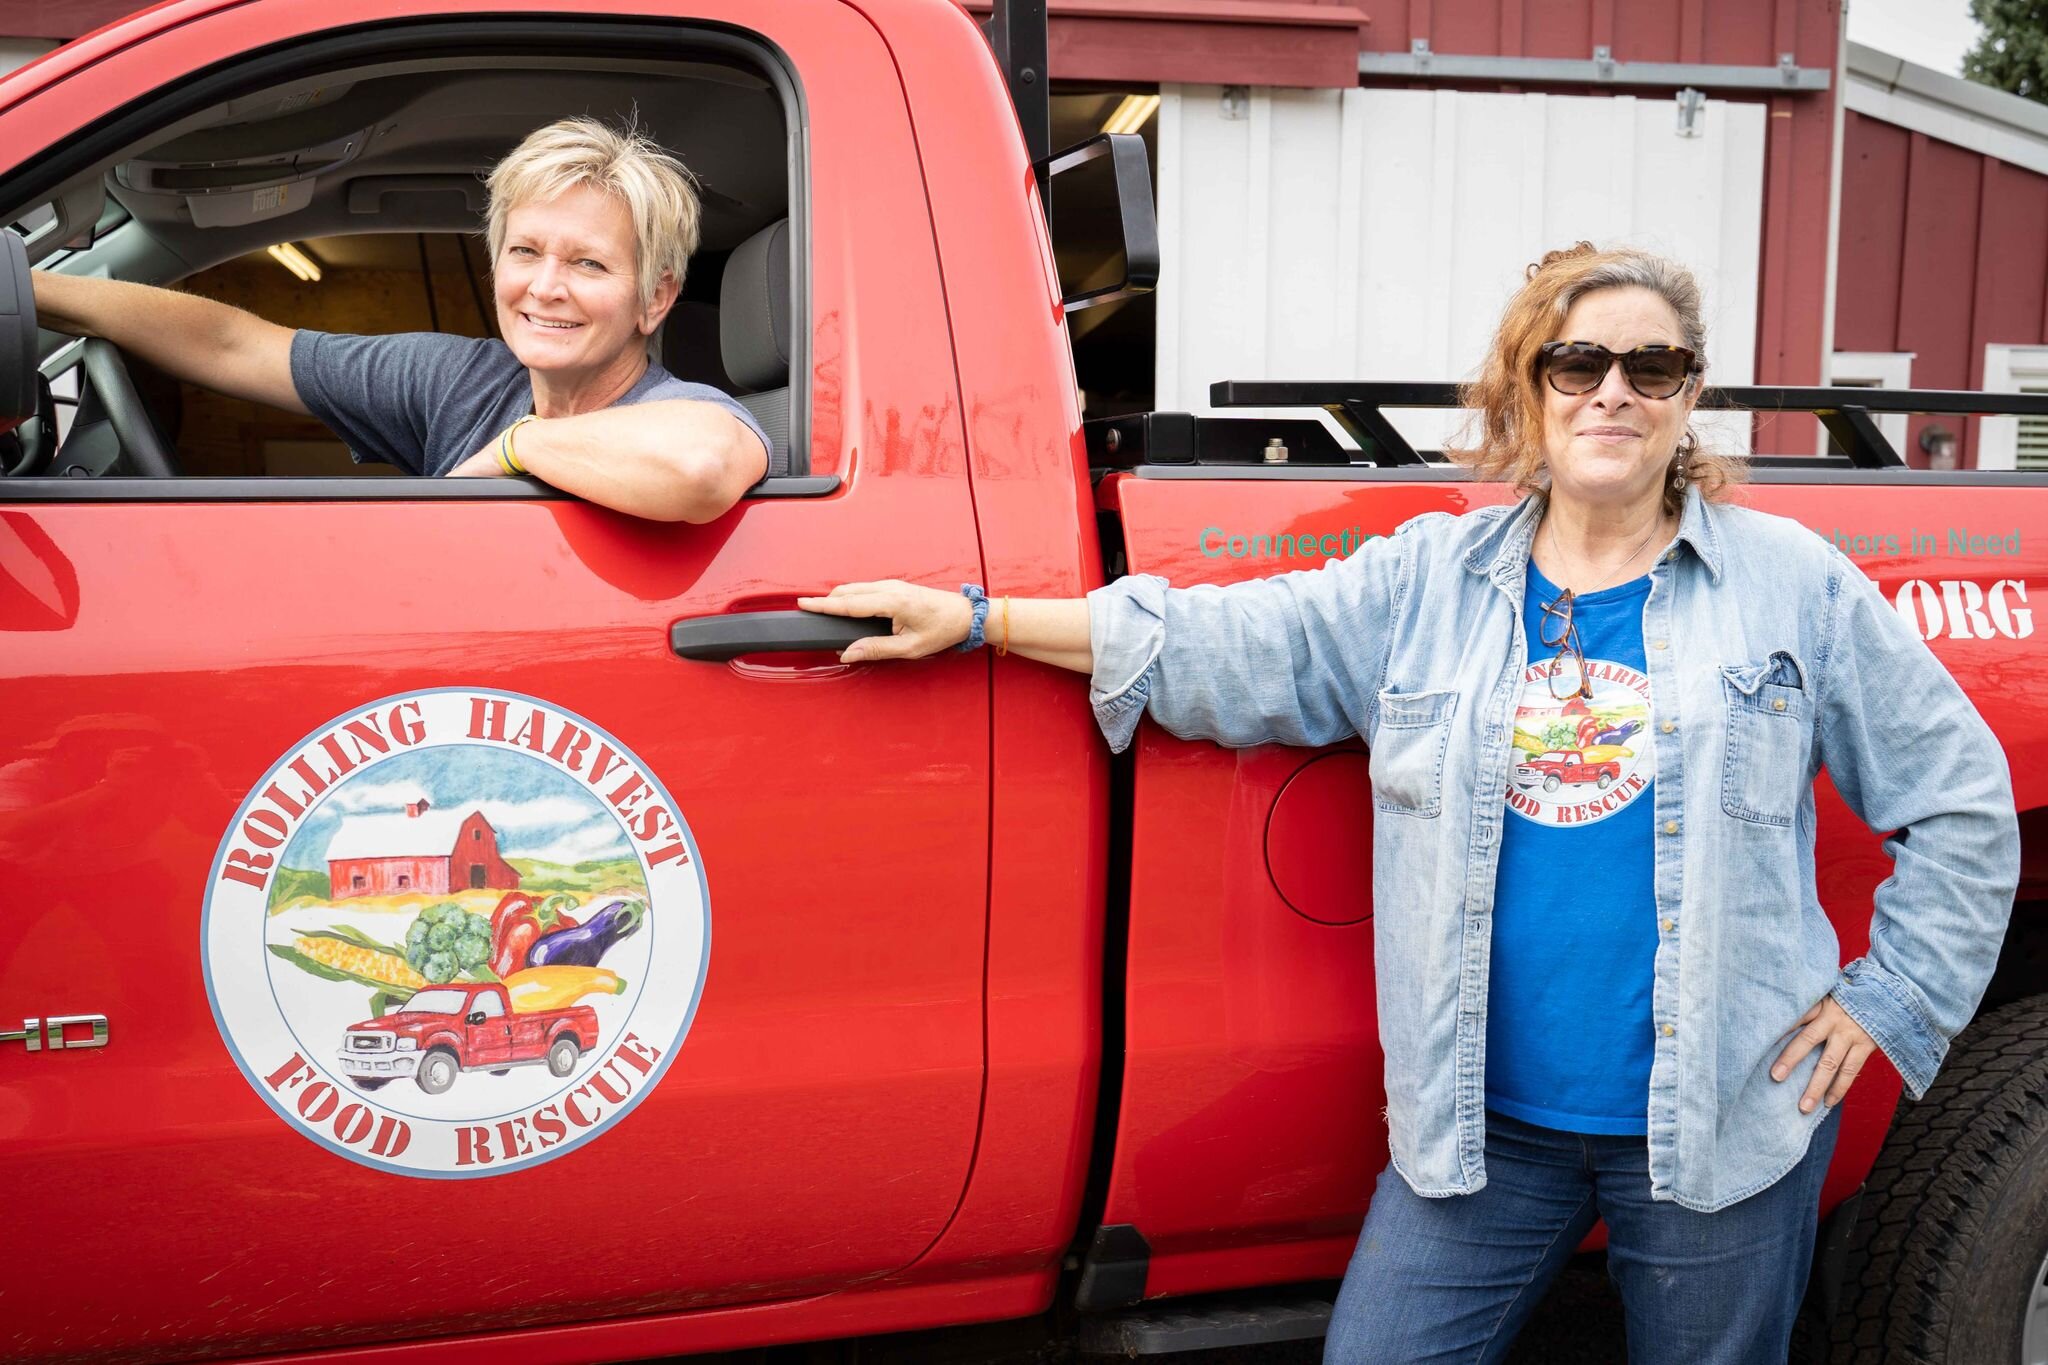 Rolling Harvest program director Jamie McKnight sits in the driver’s seat, posing with founder Cathy Snyder.